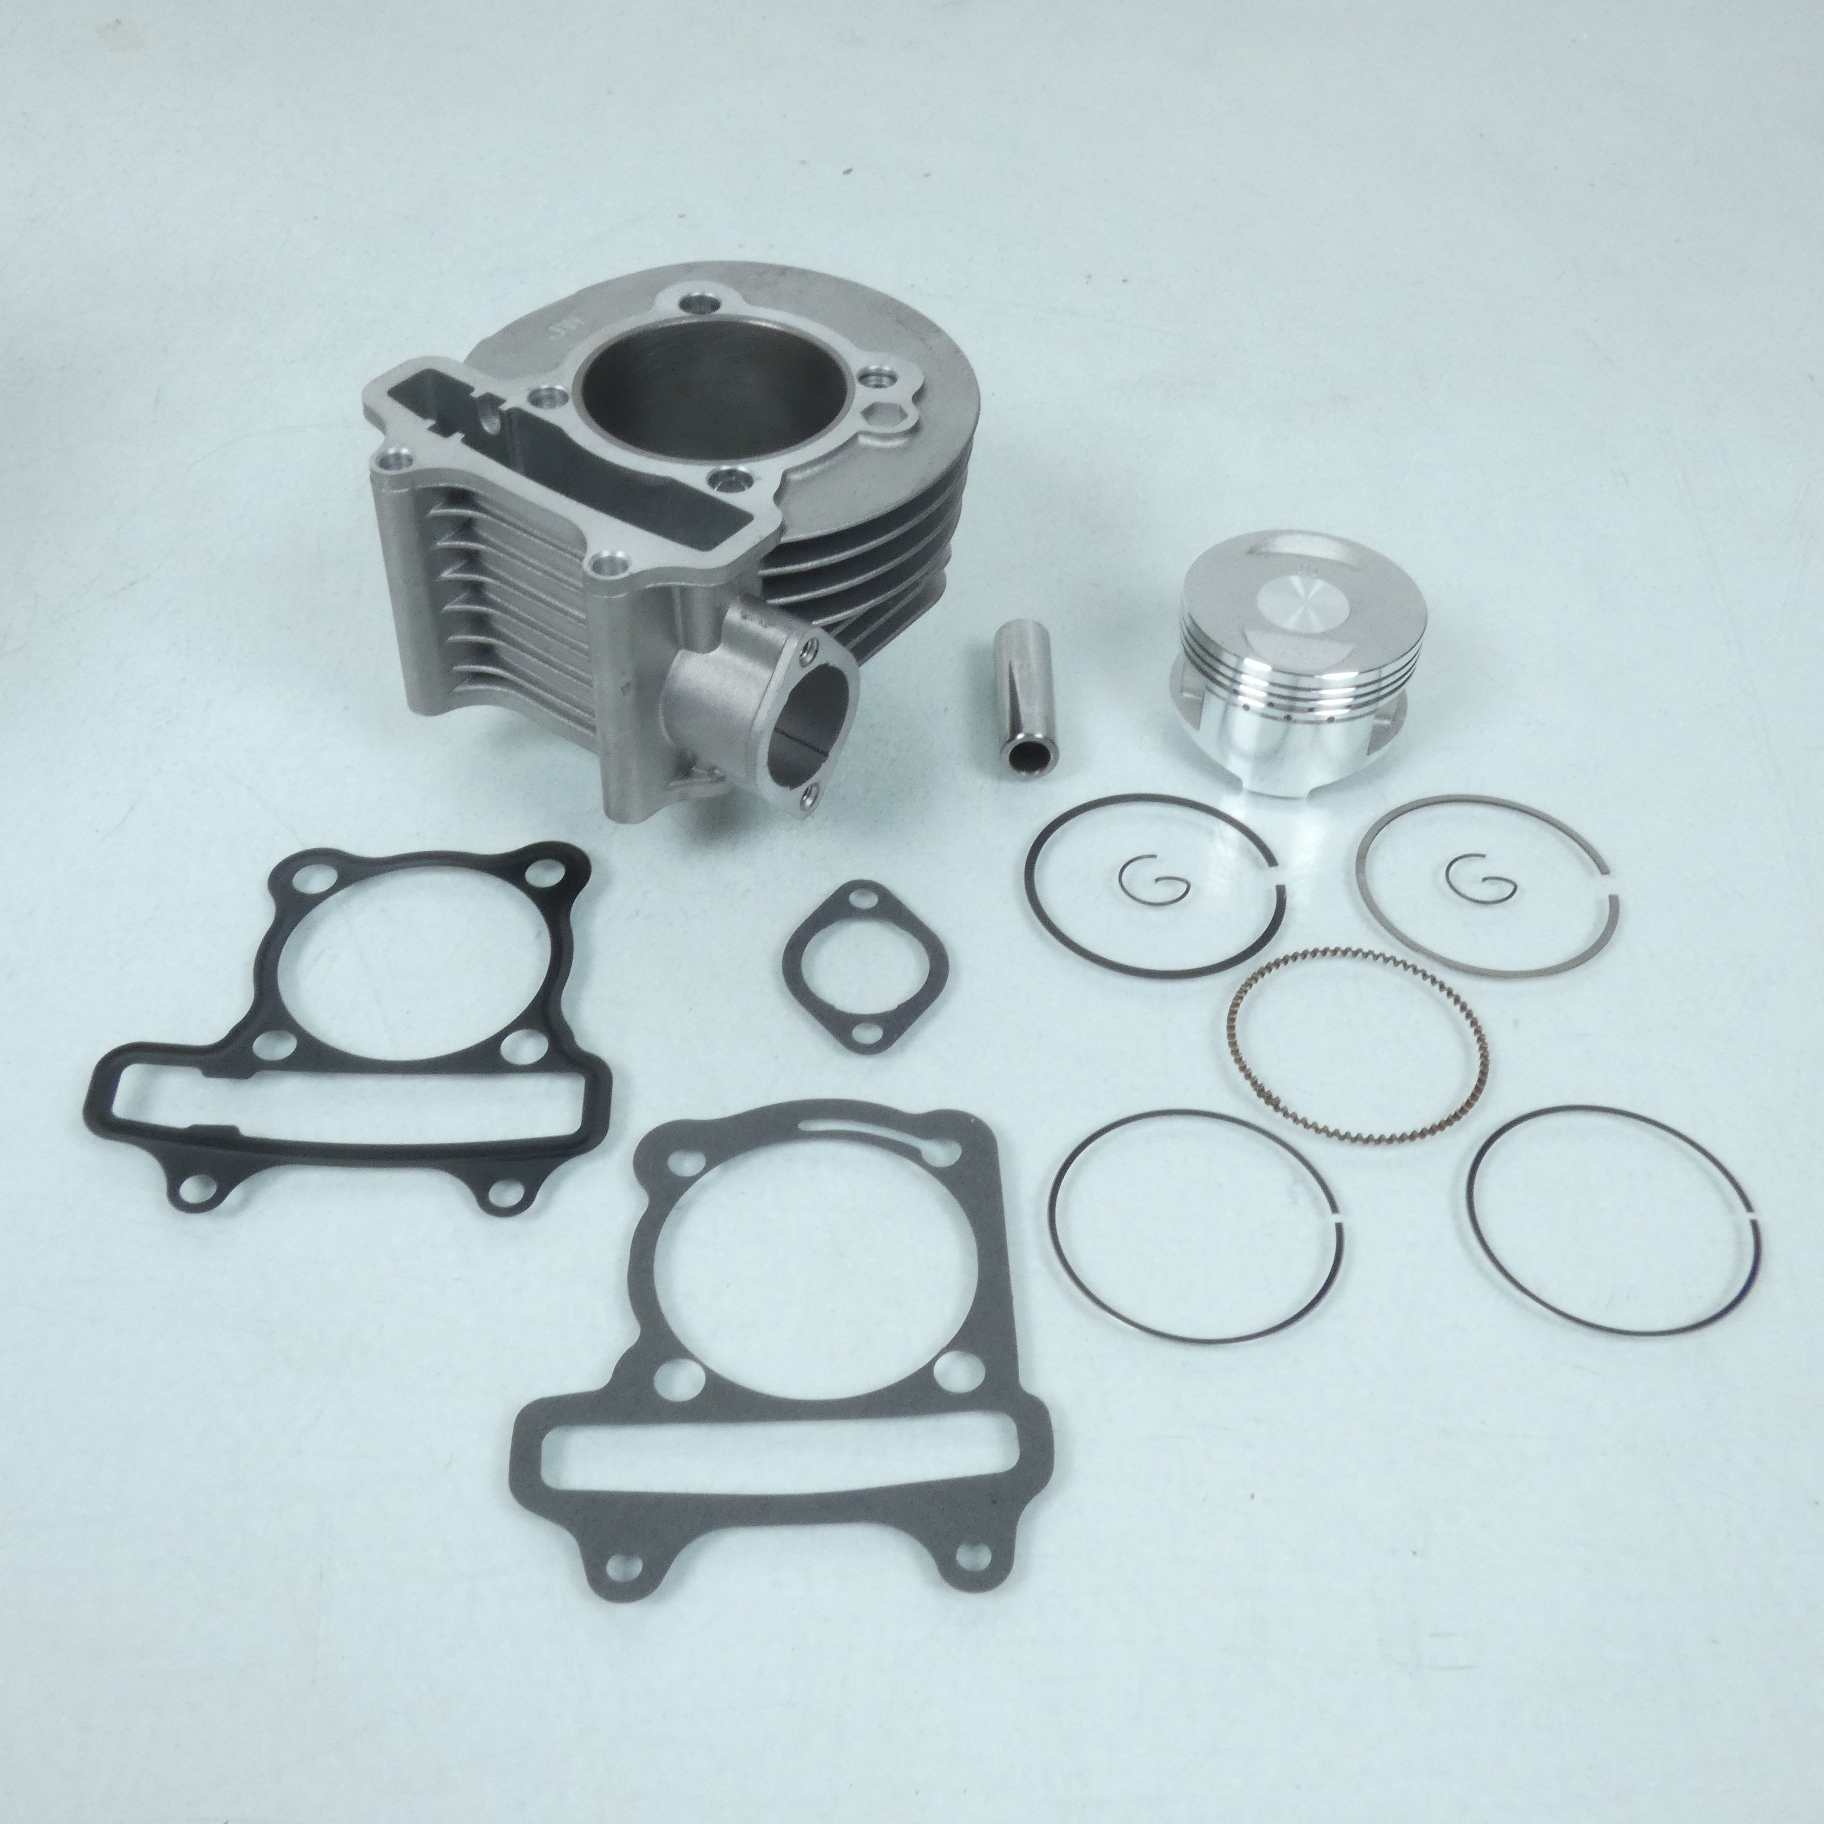 Kit Cylindre piston Ø61mm RMS Moto pour scooter Kymco 200 Agility Axe Ø15mm